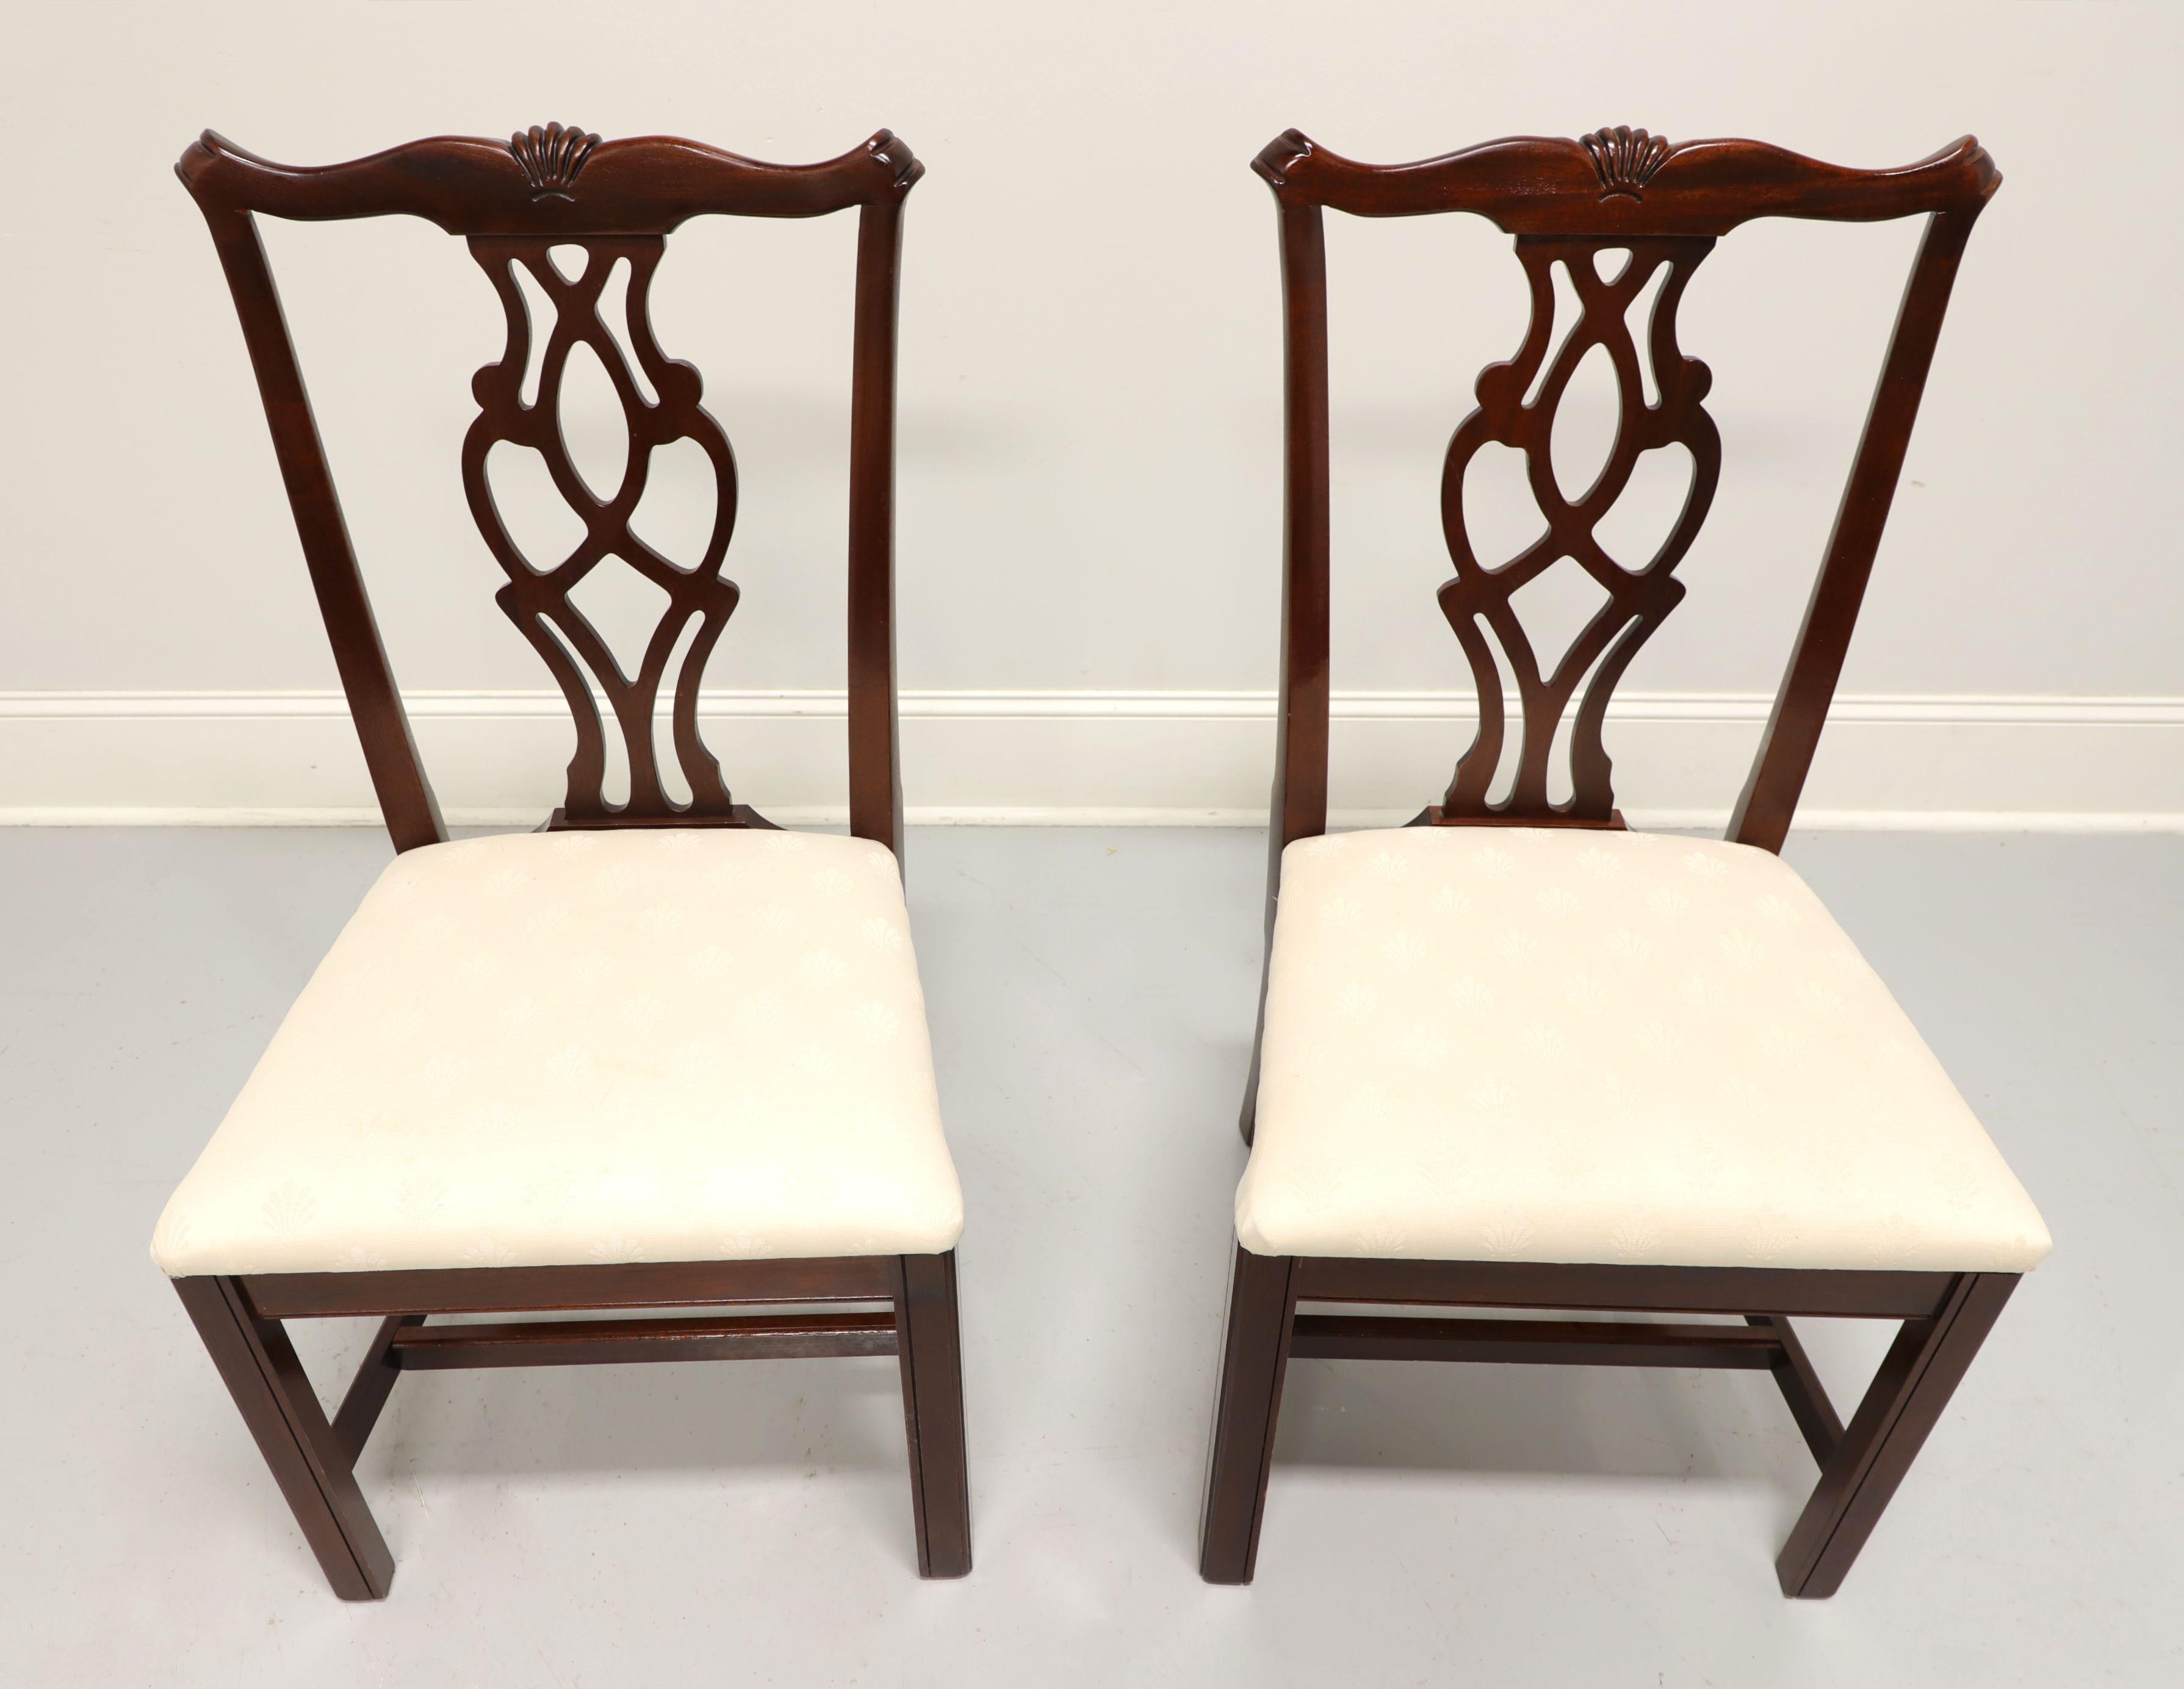 A pair of dining side chairs in the Chippendale style by Cresent, of Gallatin, Tennessee, USA. Mahogany, with fan carving to crestrail, carved backsplat, neutral cream colored brocade fabric upholstered seat, straight legs and stretcher base. Made